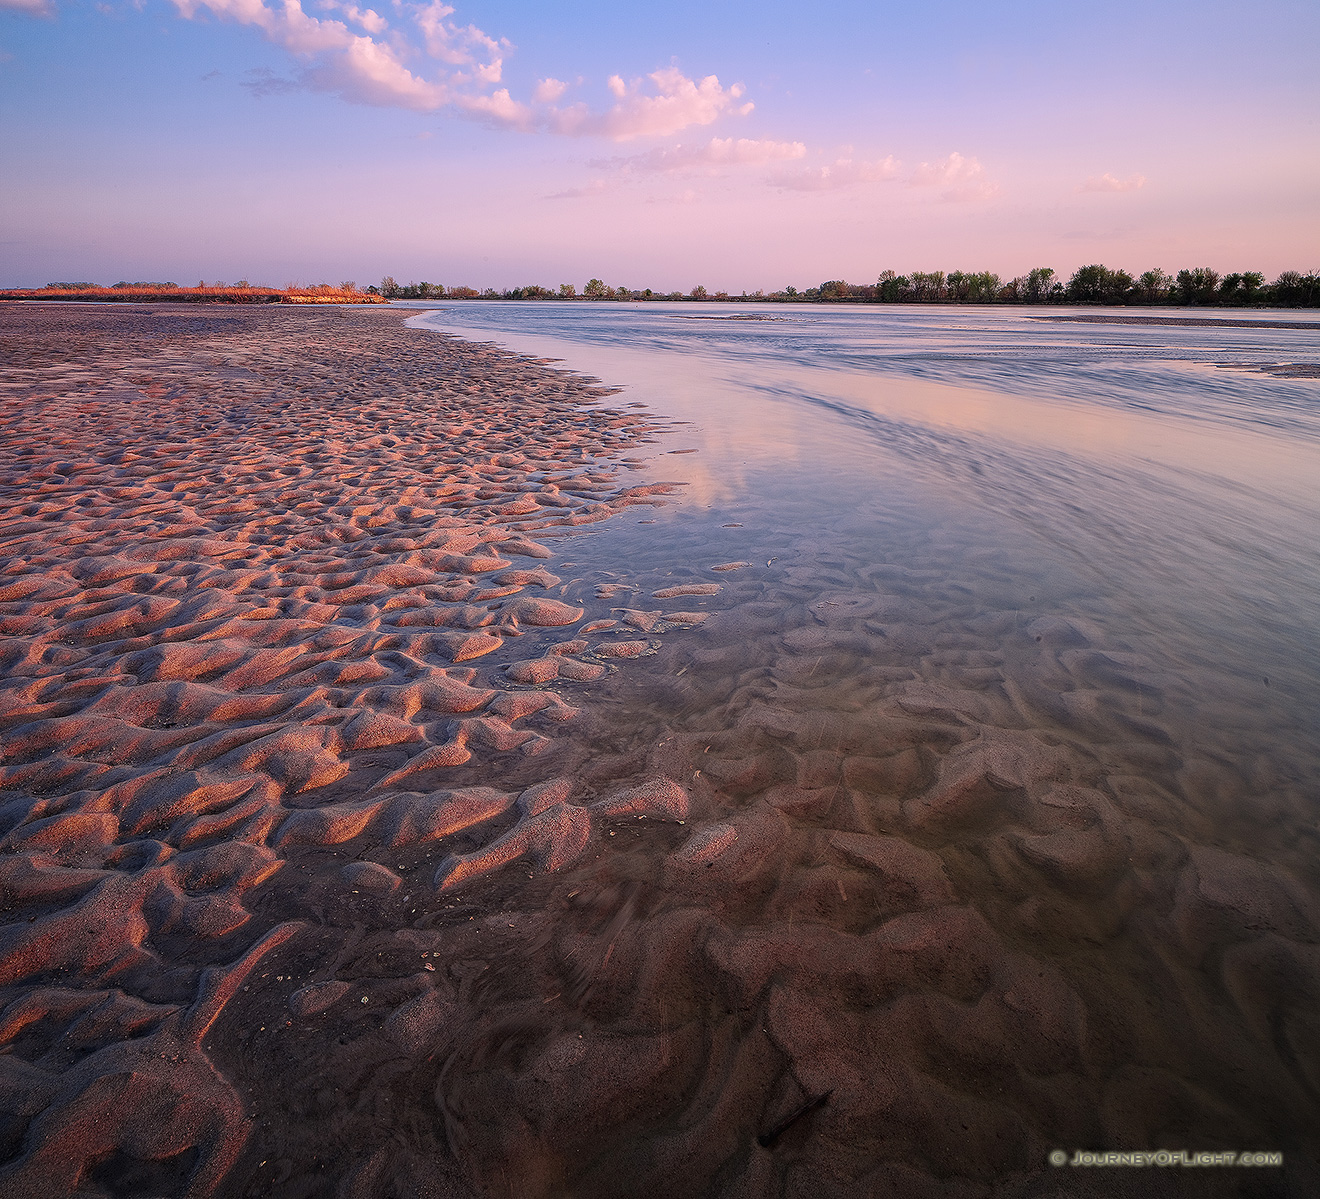 On a sandbar near Two Rivers State Recreation Area, the Platte River flows into the distance as the sun sets to the west. - Nebraska Picture